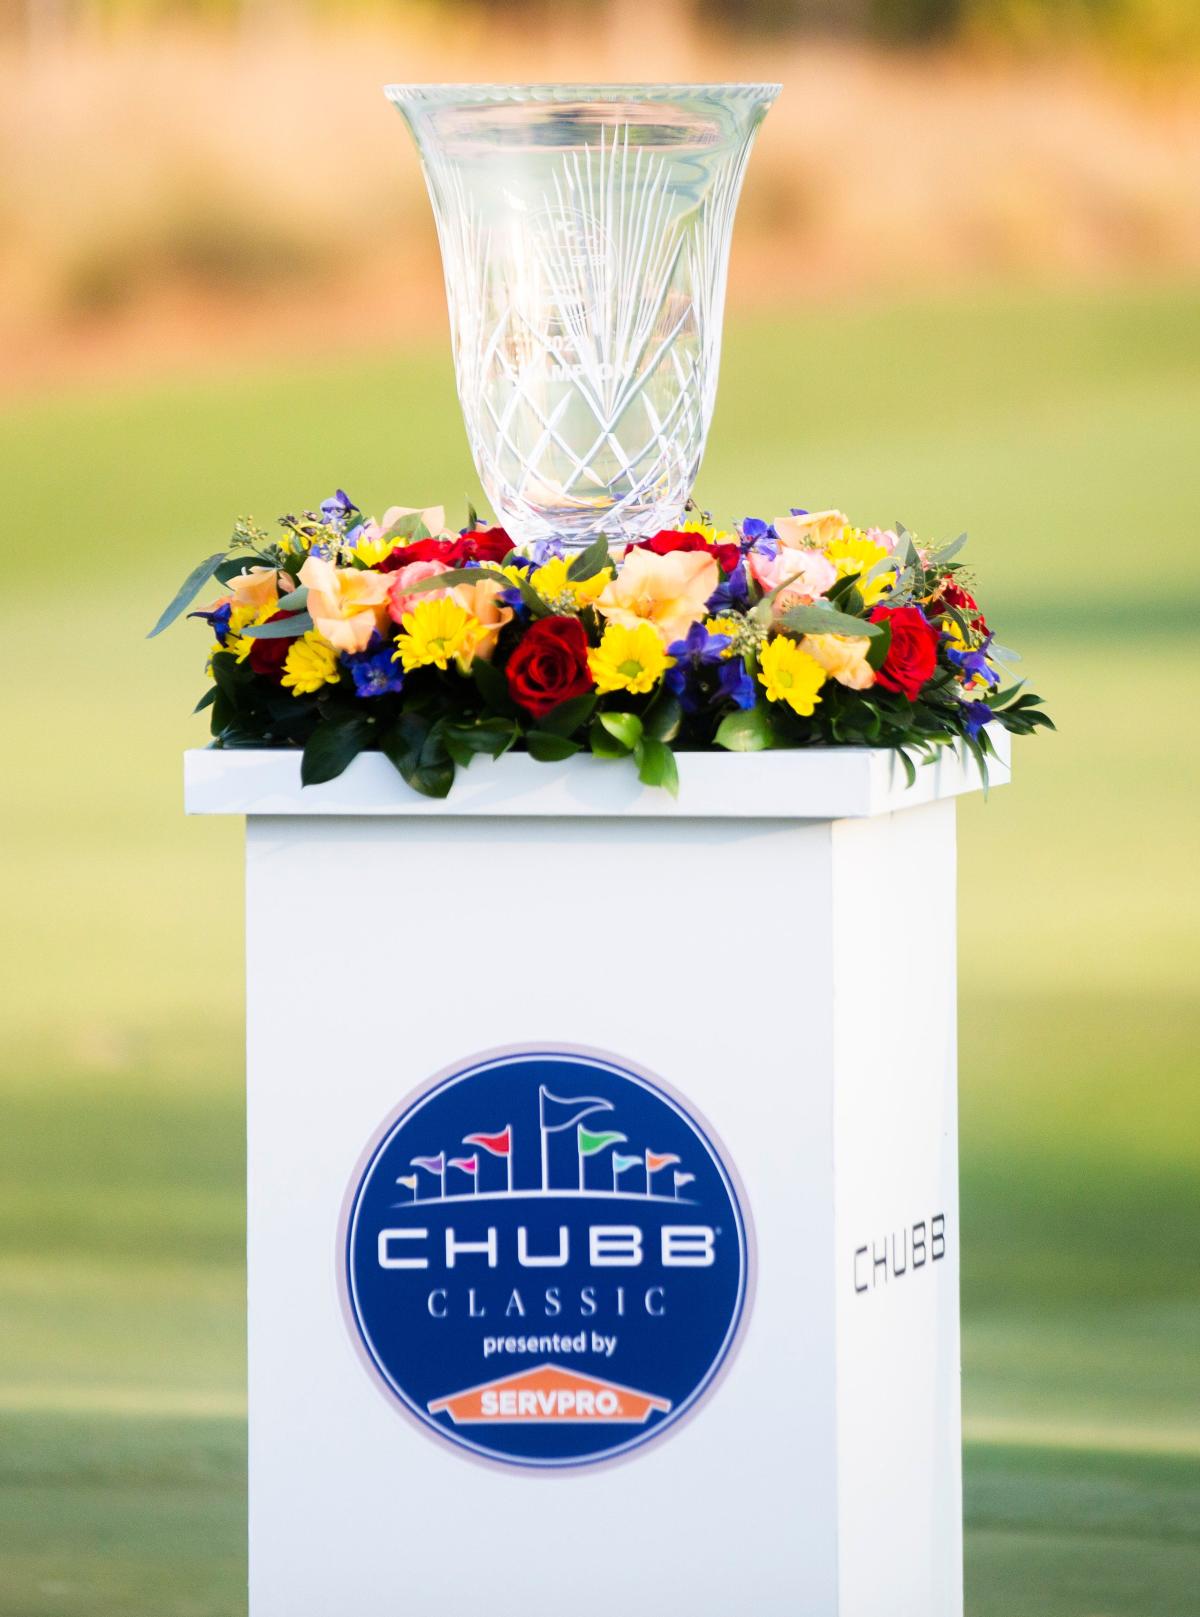 What to know before heading to the Chubb Classic golf tournament in Naples